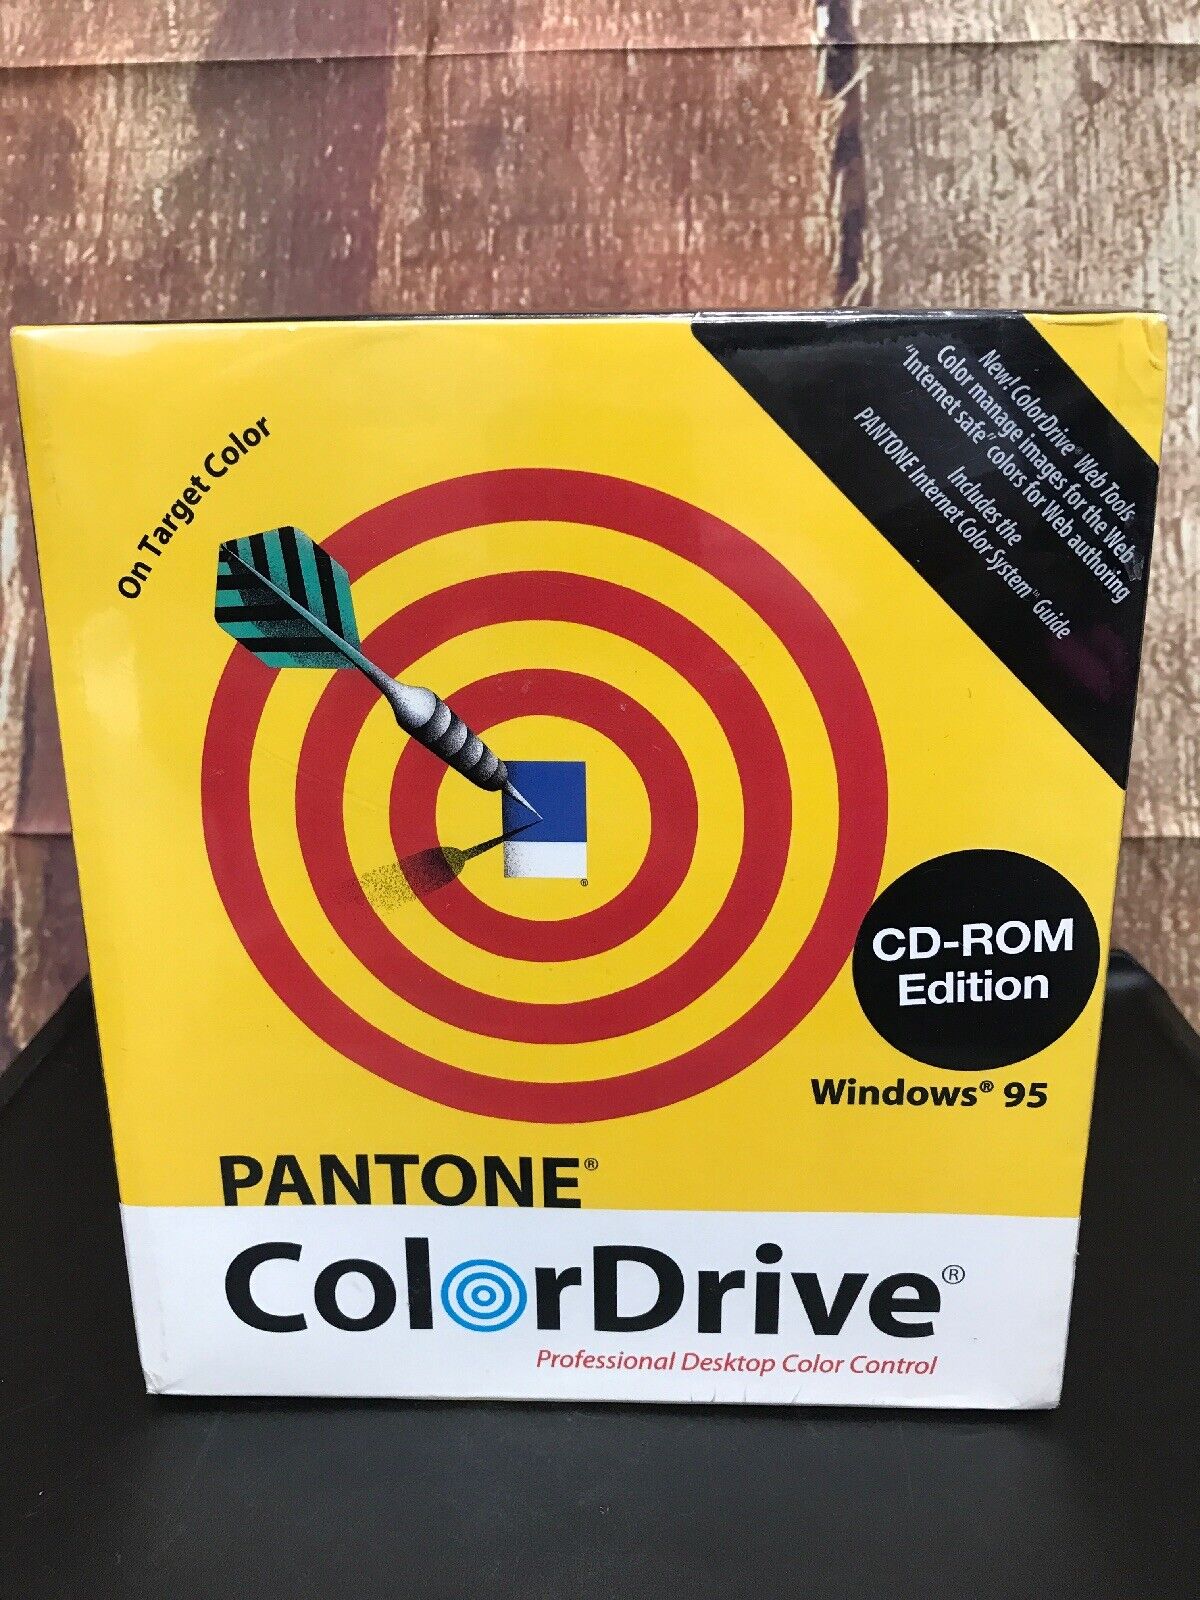 Pantone Color Drive Vintage CD-ROM Edition Windows 95 Software New